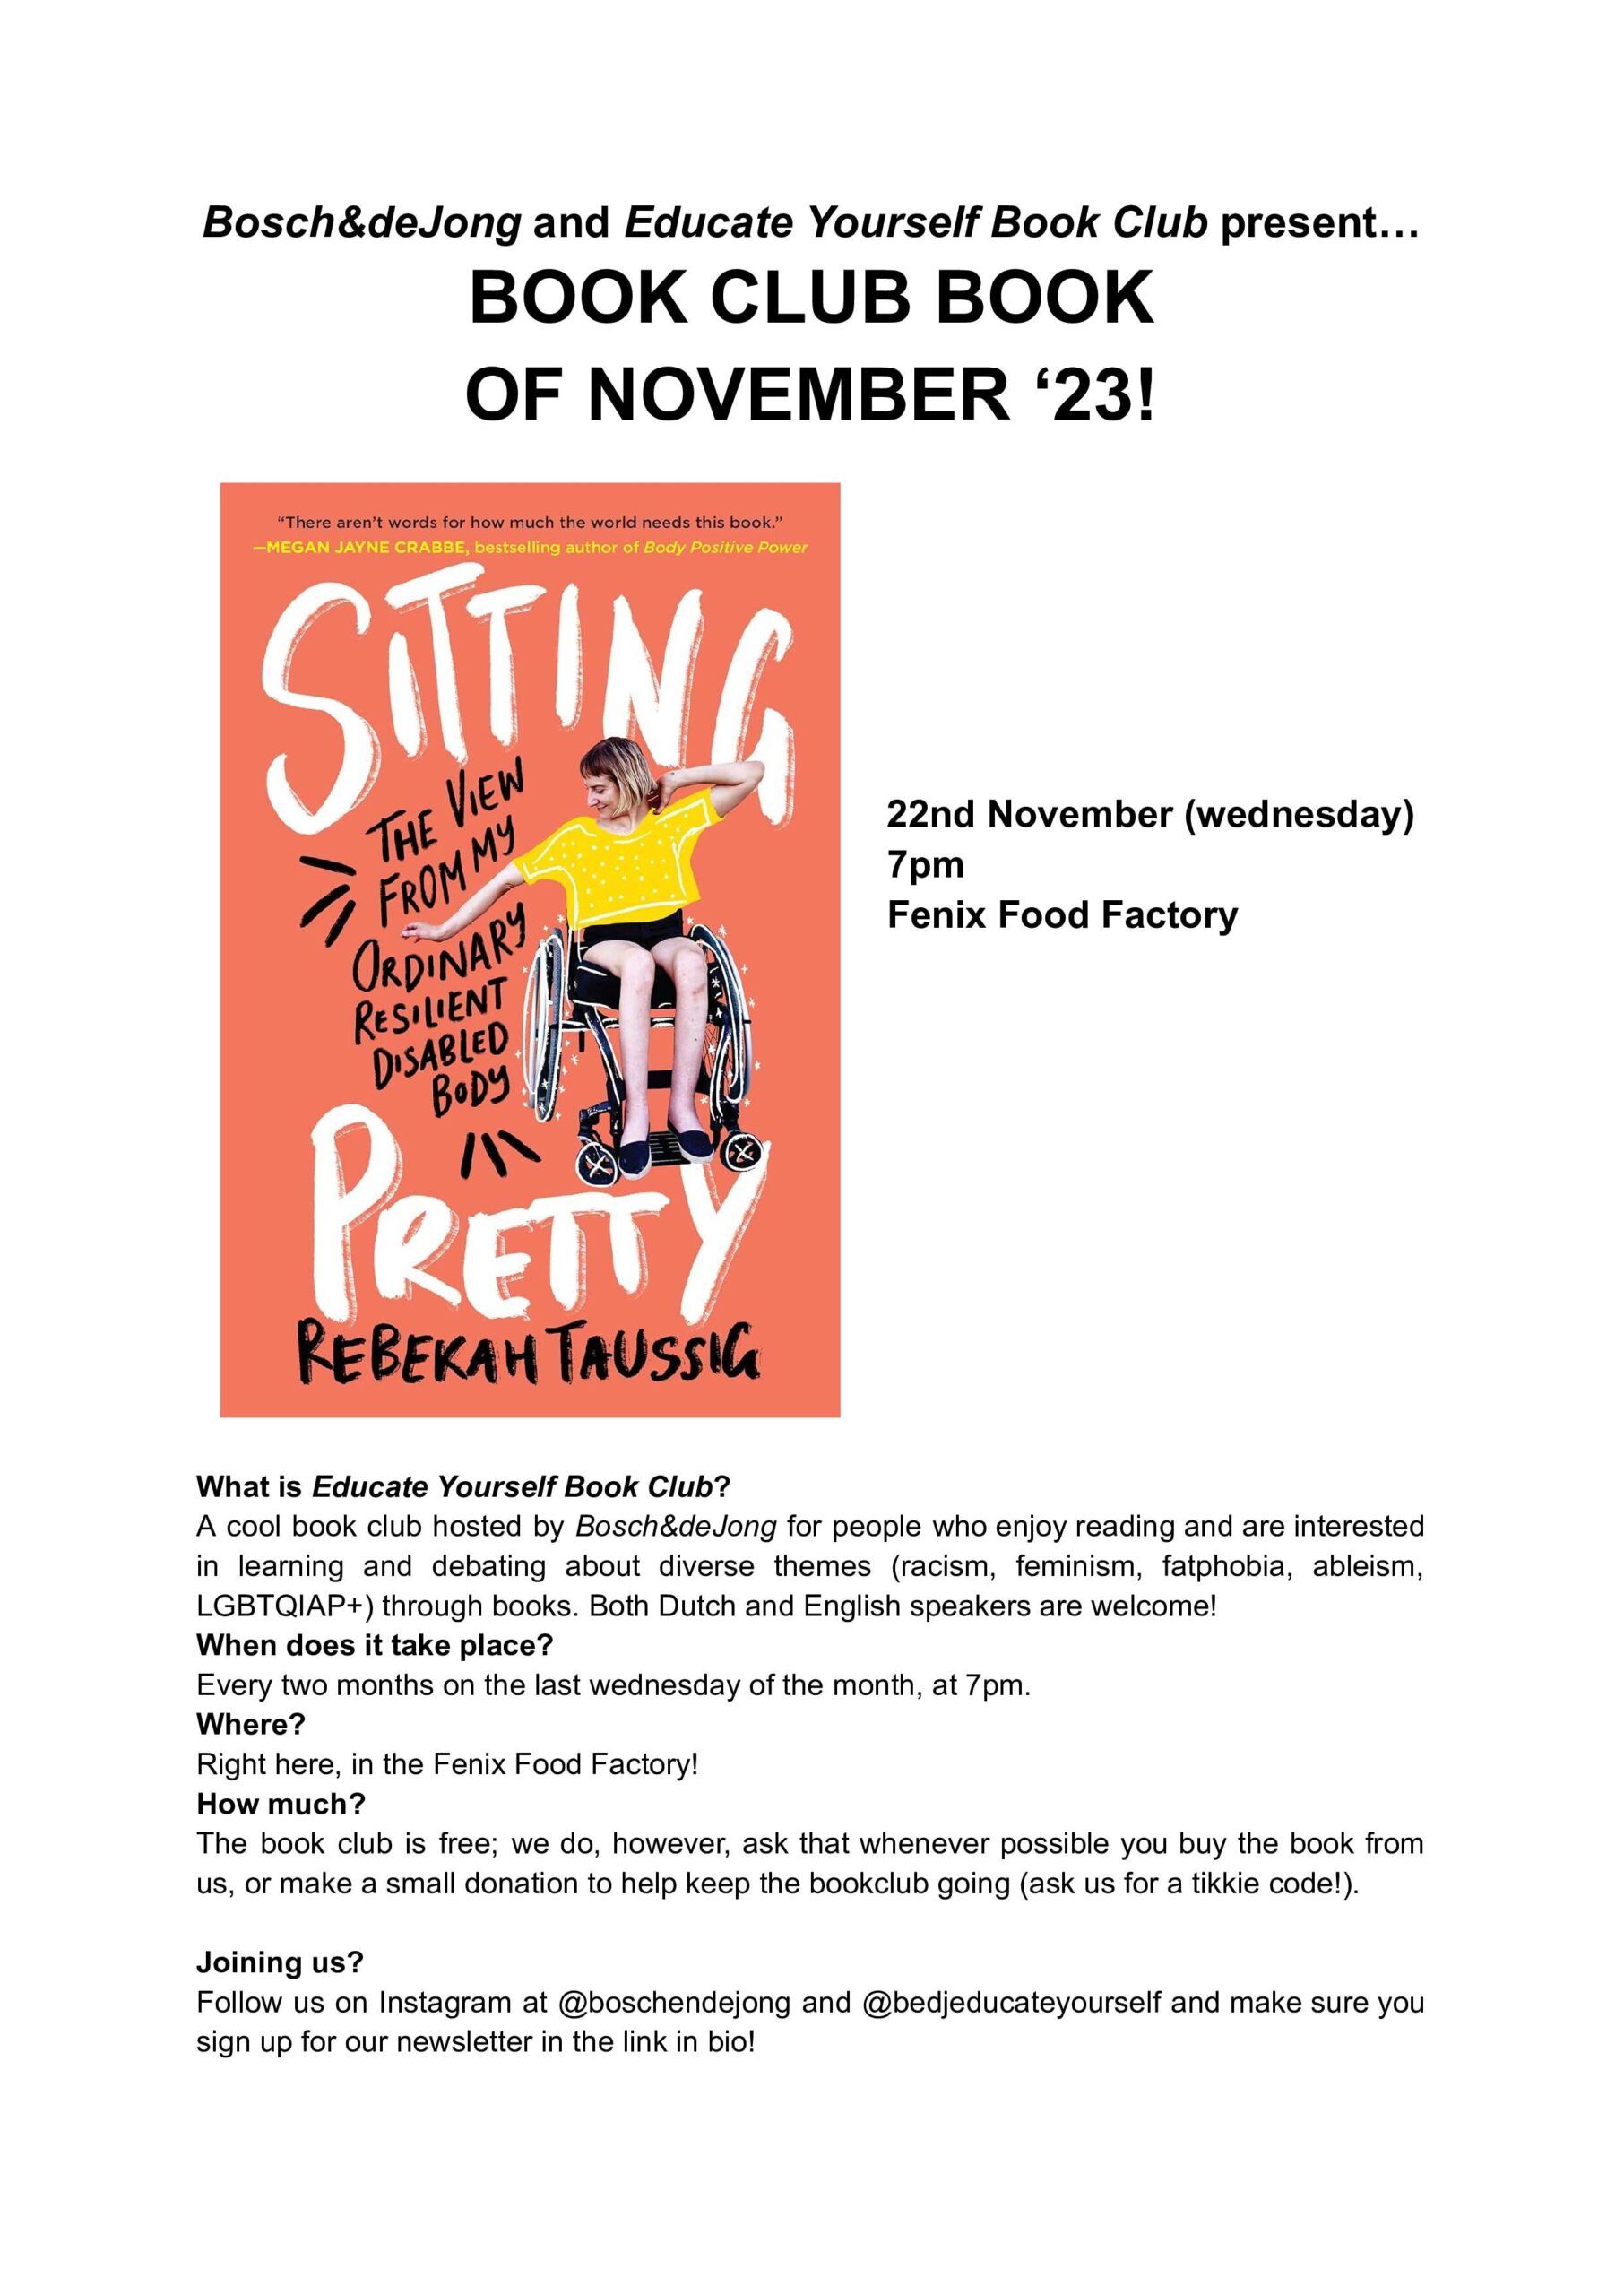 Image of a book club poster announcing the book read for November, with a cover of the book and information about the book club